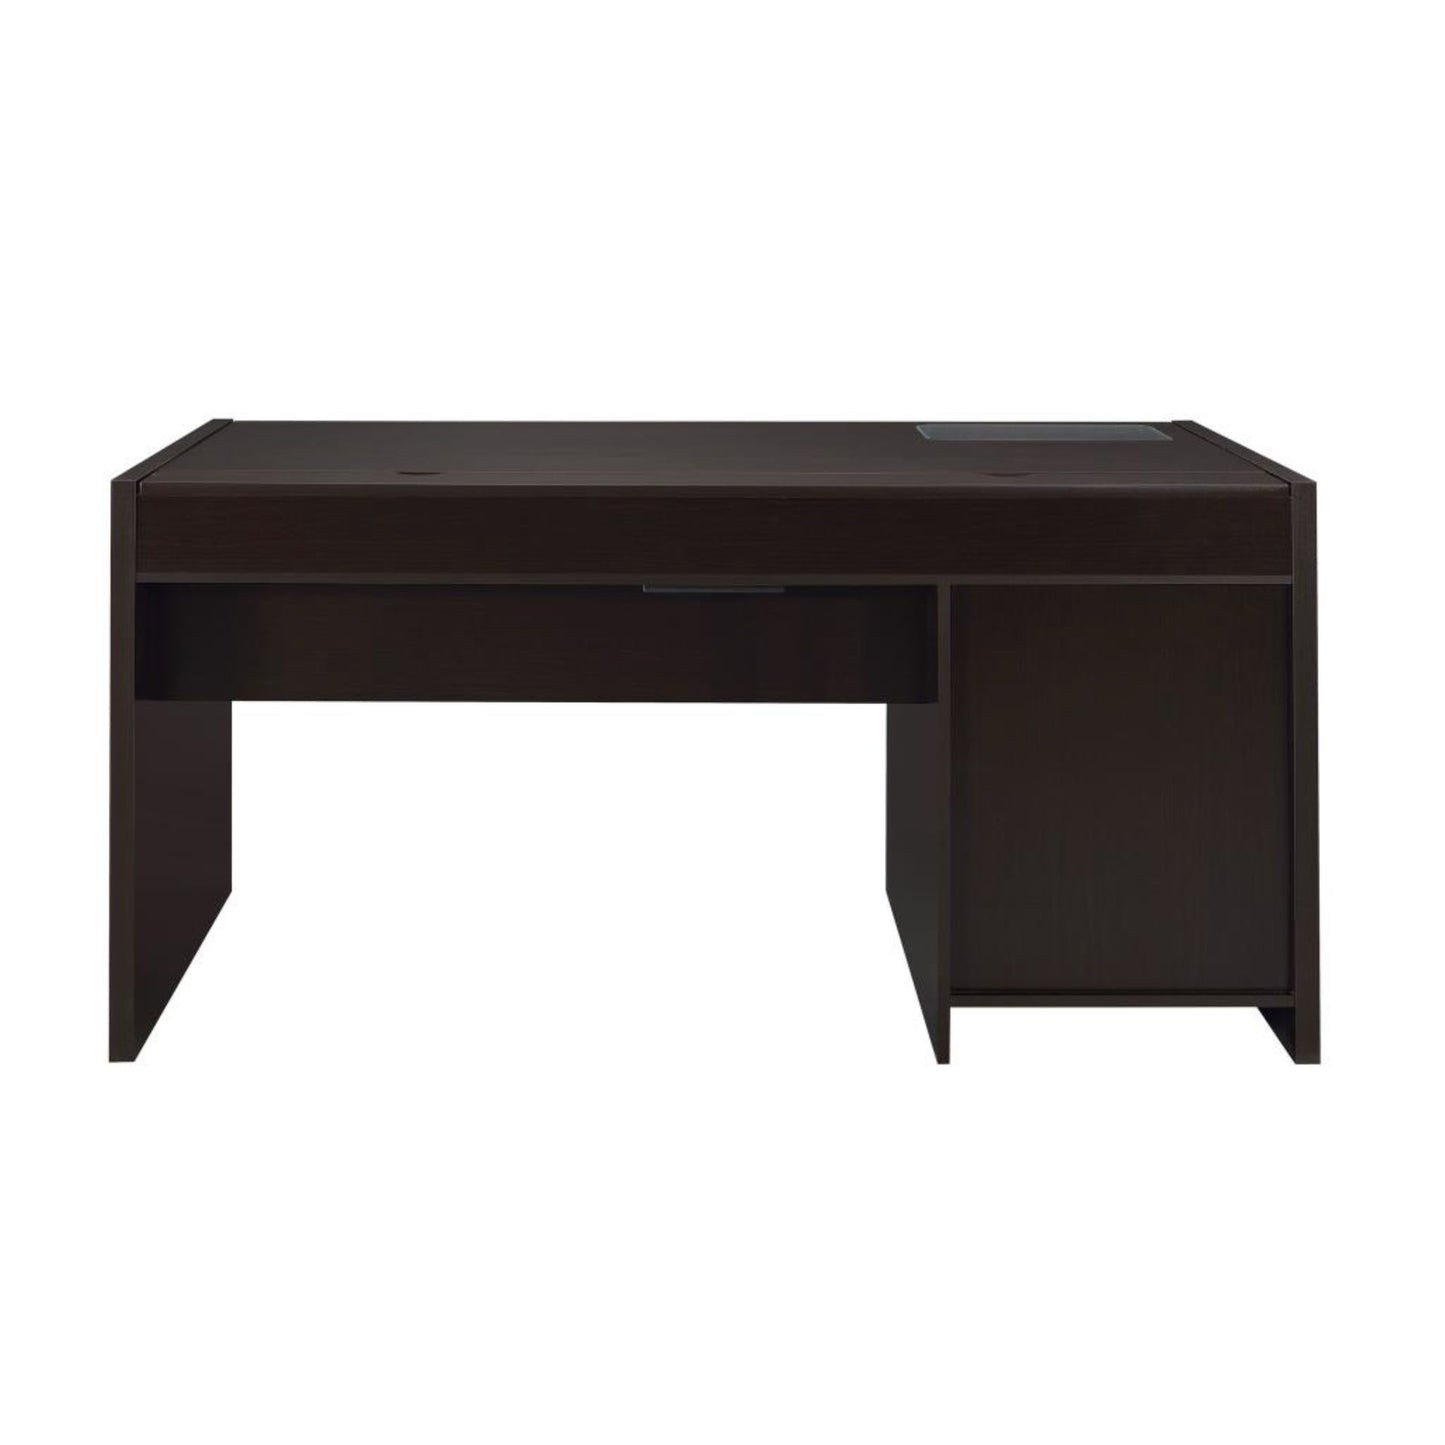 HALSTON 3-drawer Connect-it Office Desk Cappuccino